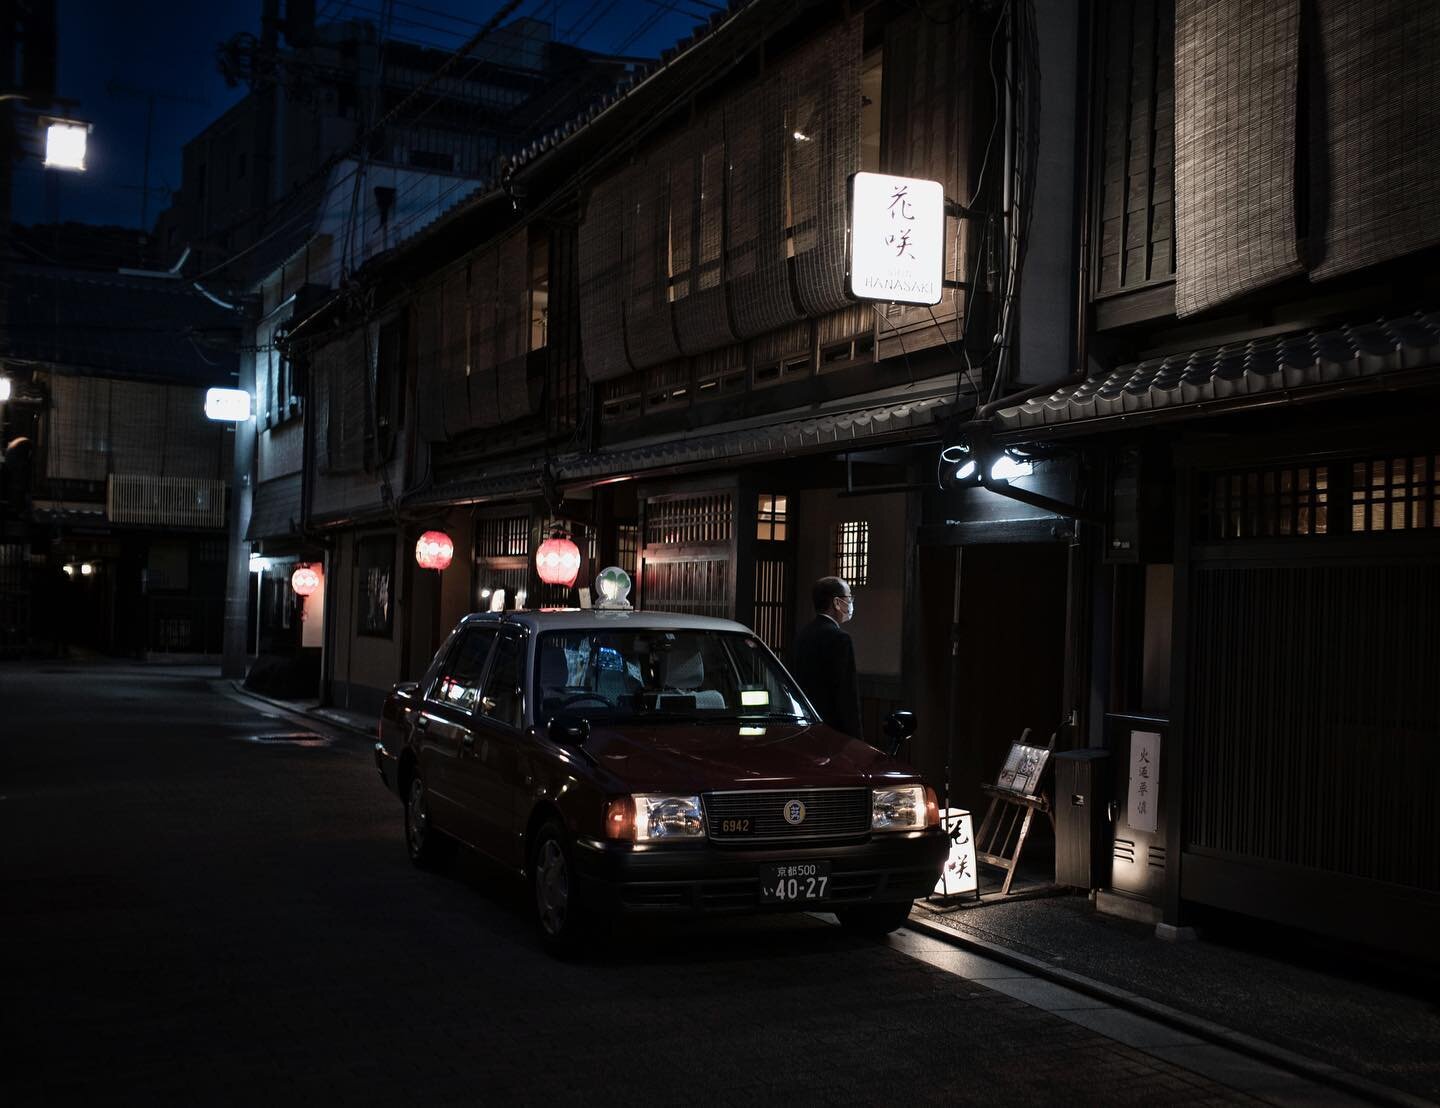 Took this snap after leaving a delicious gyoza shop in Tsukimicho, Kyoto. 2022 #filmnoir #kyotonight #davidlynch #japantravel #toyotacrown #gyozalover